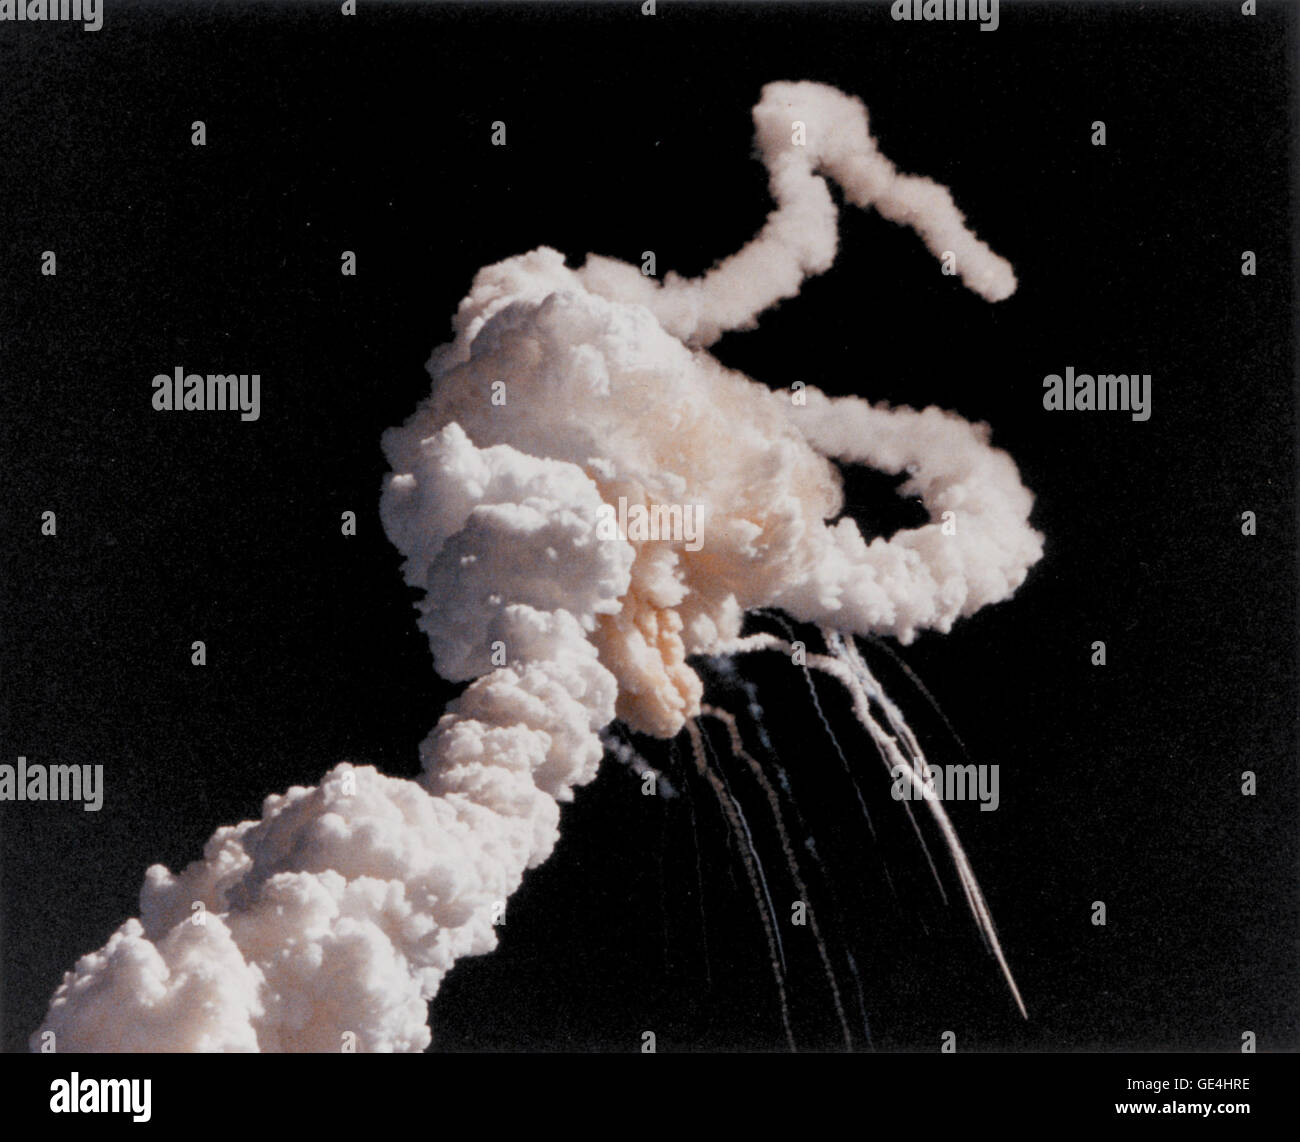 On January 28, 1986, the Space Shuttle Challenger and her seven-member crew were lost when a ruptured O-ring in the right Solid Rocket Booster caused an explosion soon after launch. This photograph, taken a few seconds after the accident, shows the Space Shuttle Main Engines and Solid Rocket Booster exhaust plumes entwined around a ball of gas from the External Tank. Because shuttle launches had become almost routine after fifty successful missions, those watching the shuttle launch in person and on television found the sight of the explosion especially shocking and difficult to believe until  Stock Photo